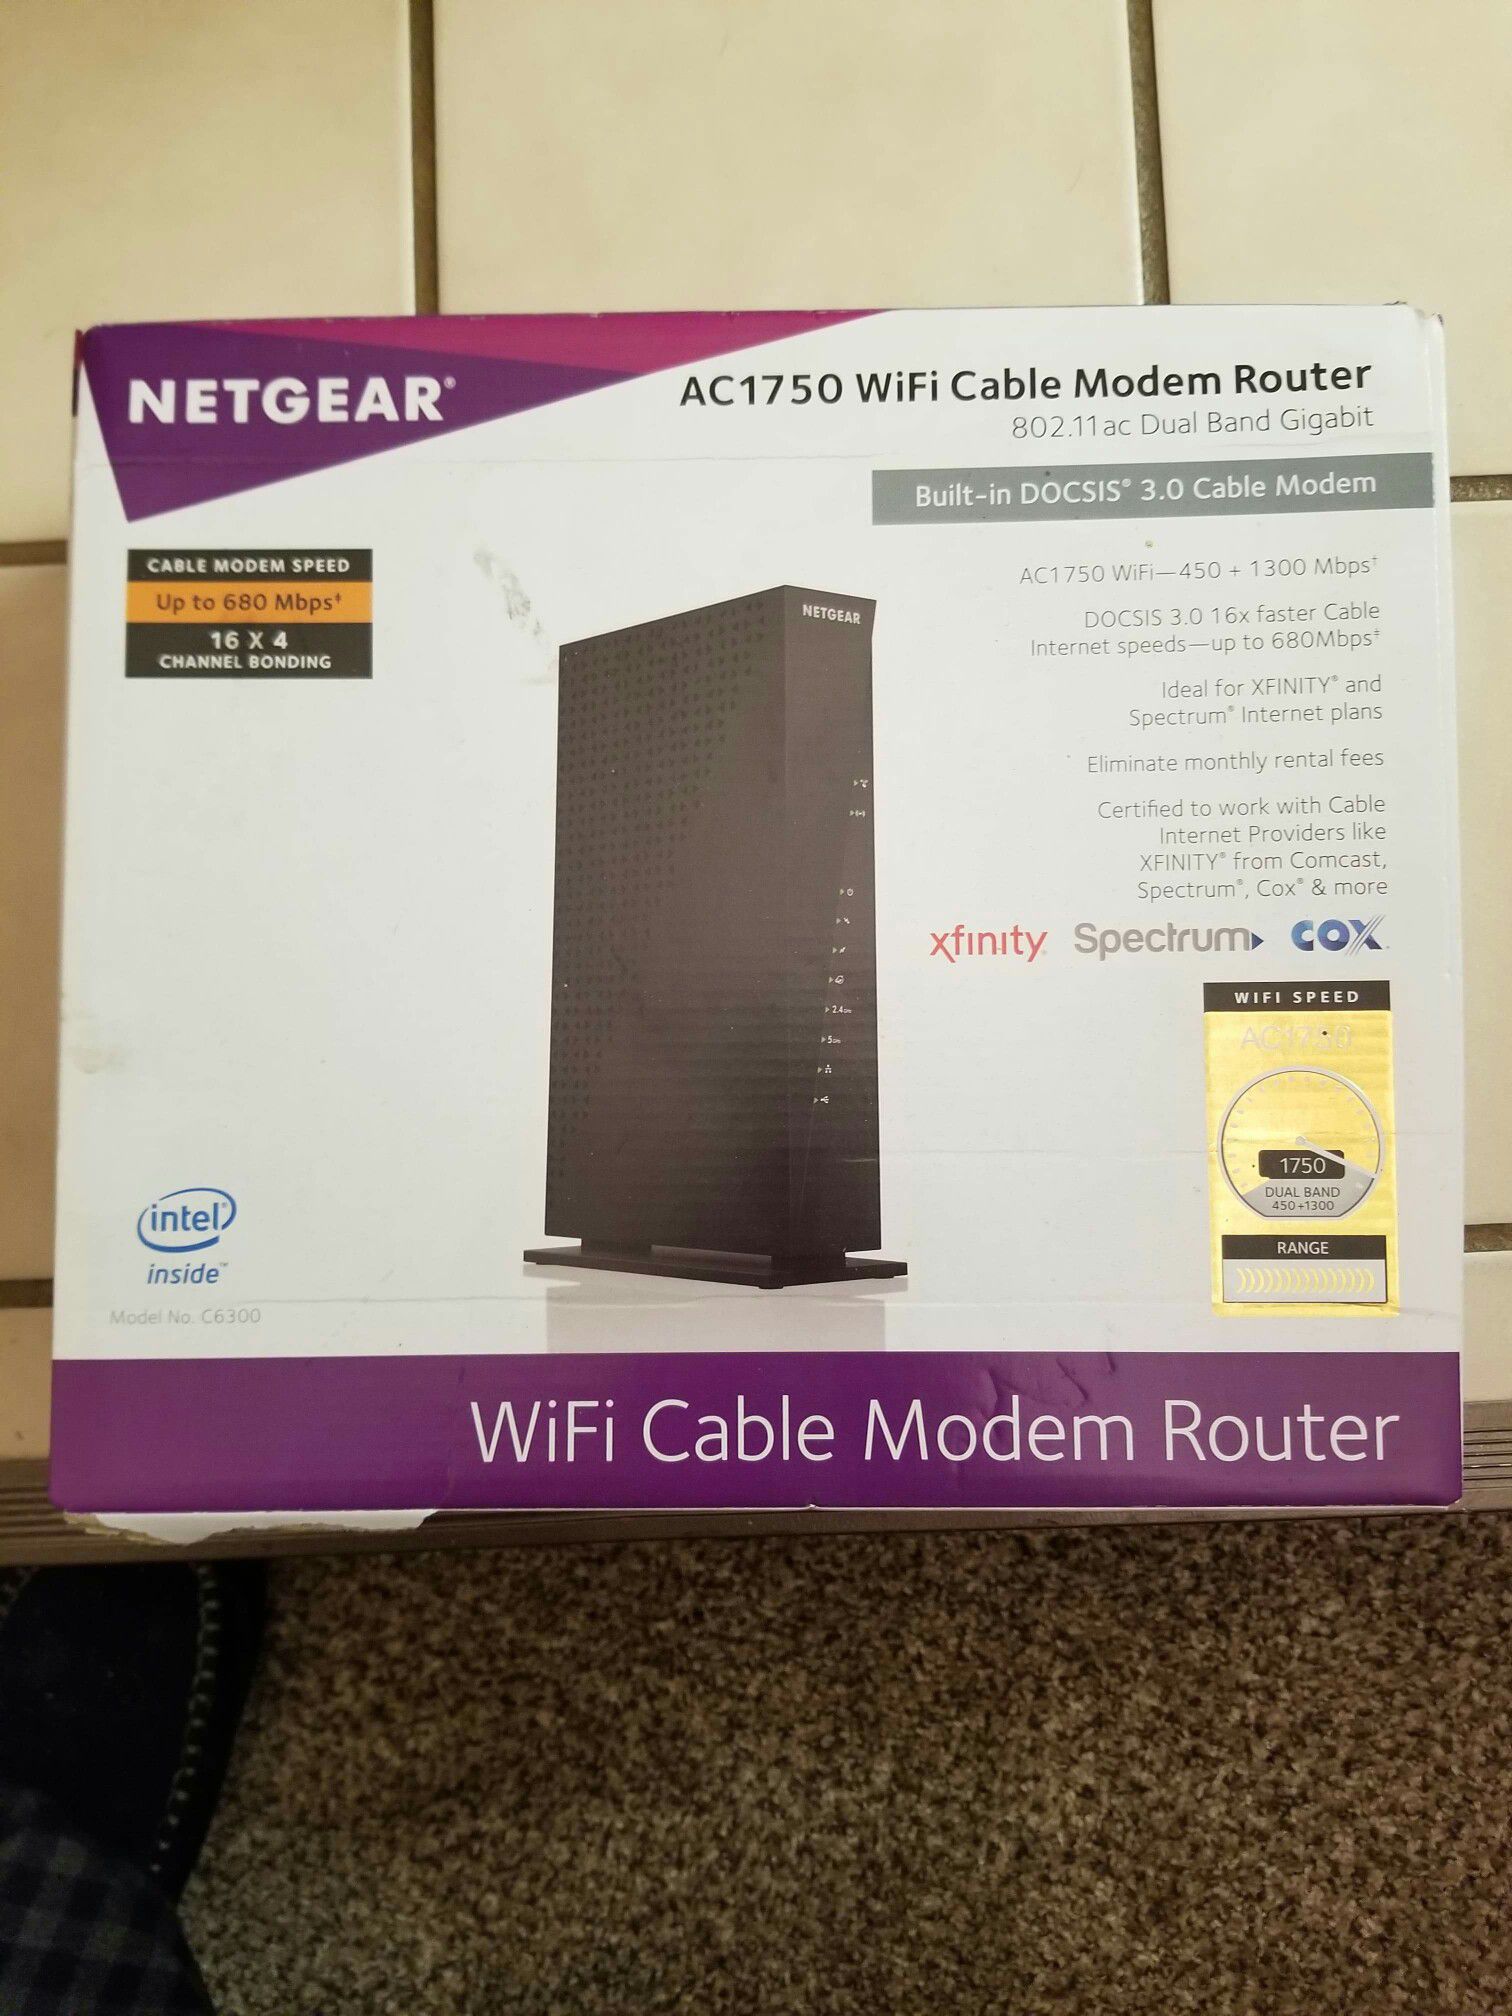 Brand new cable modem router